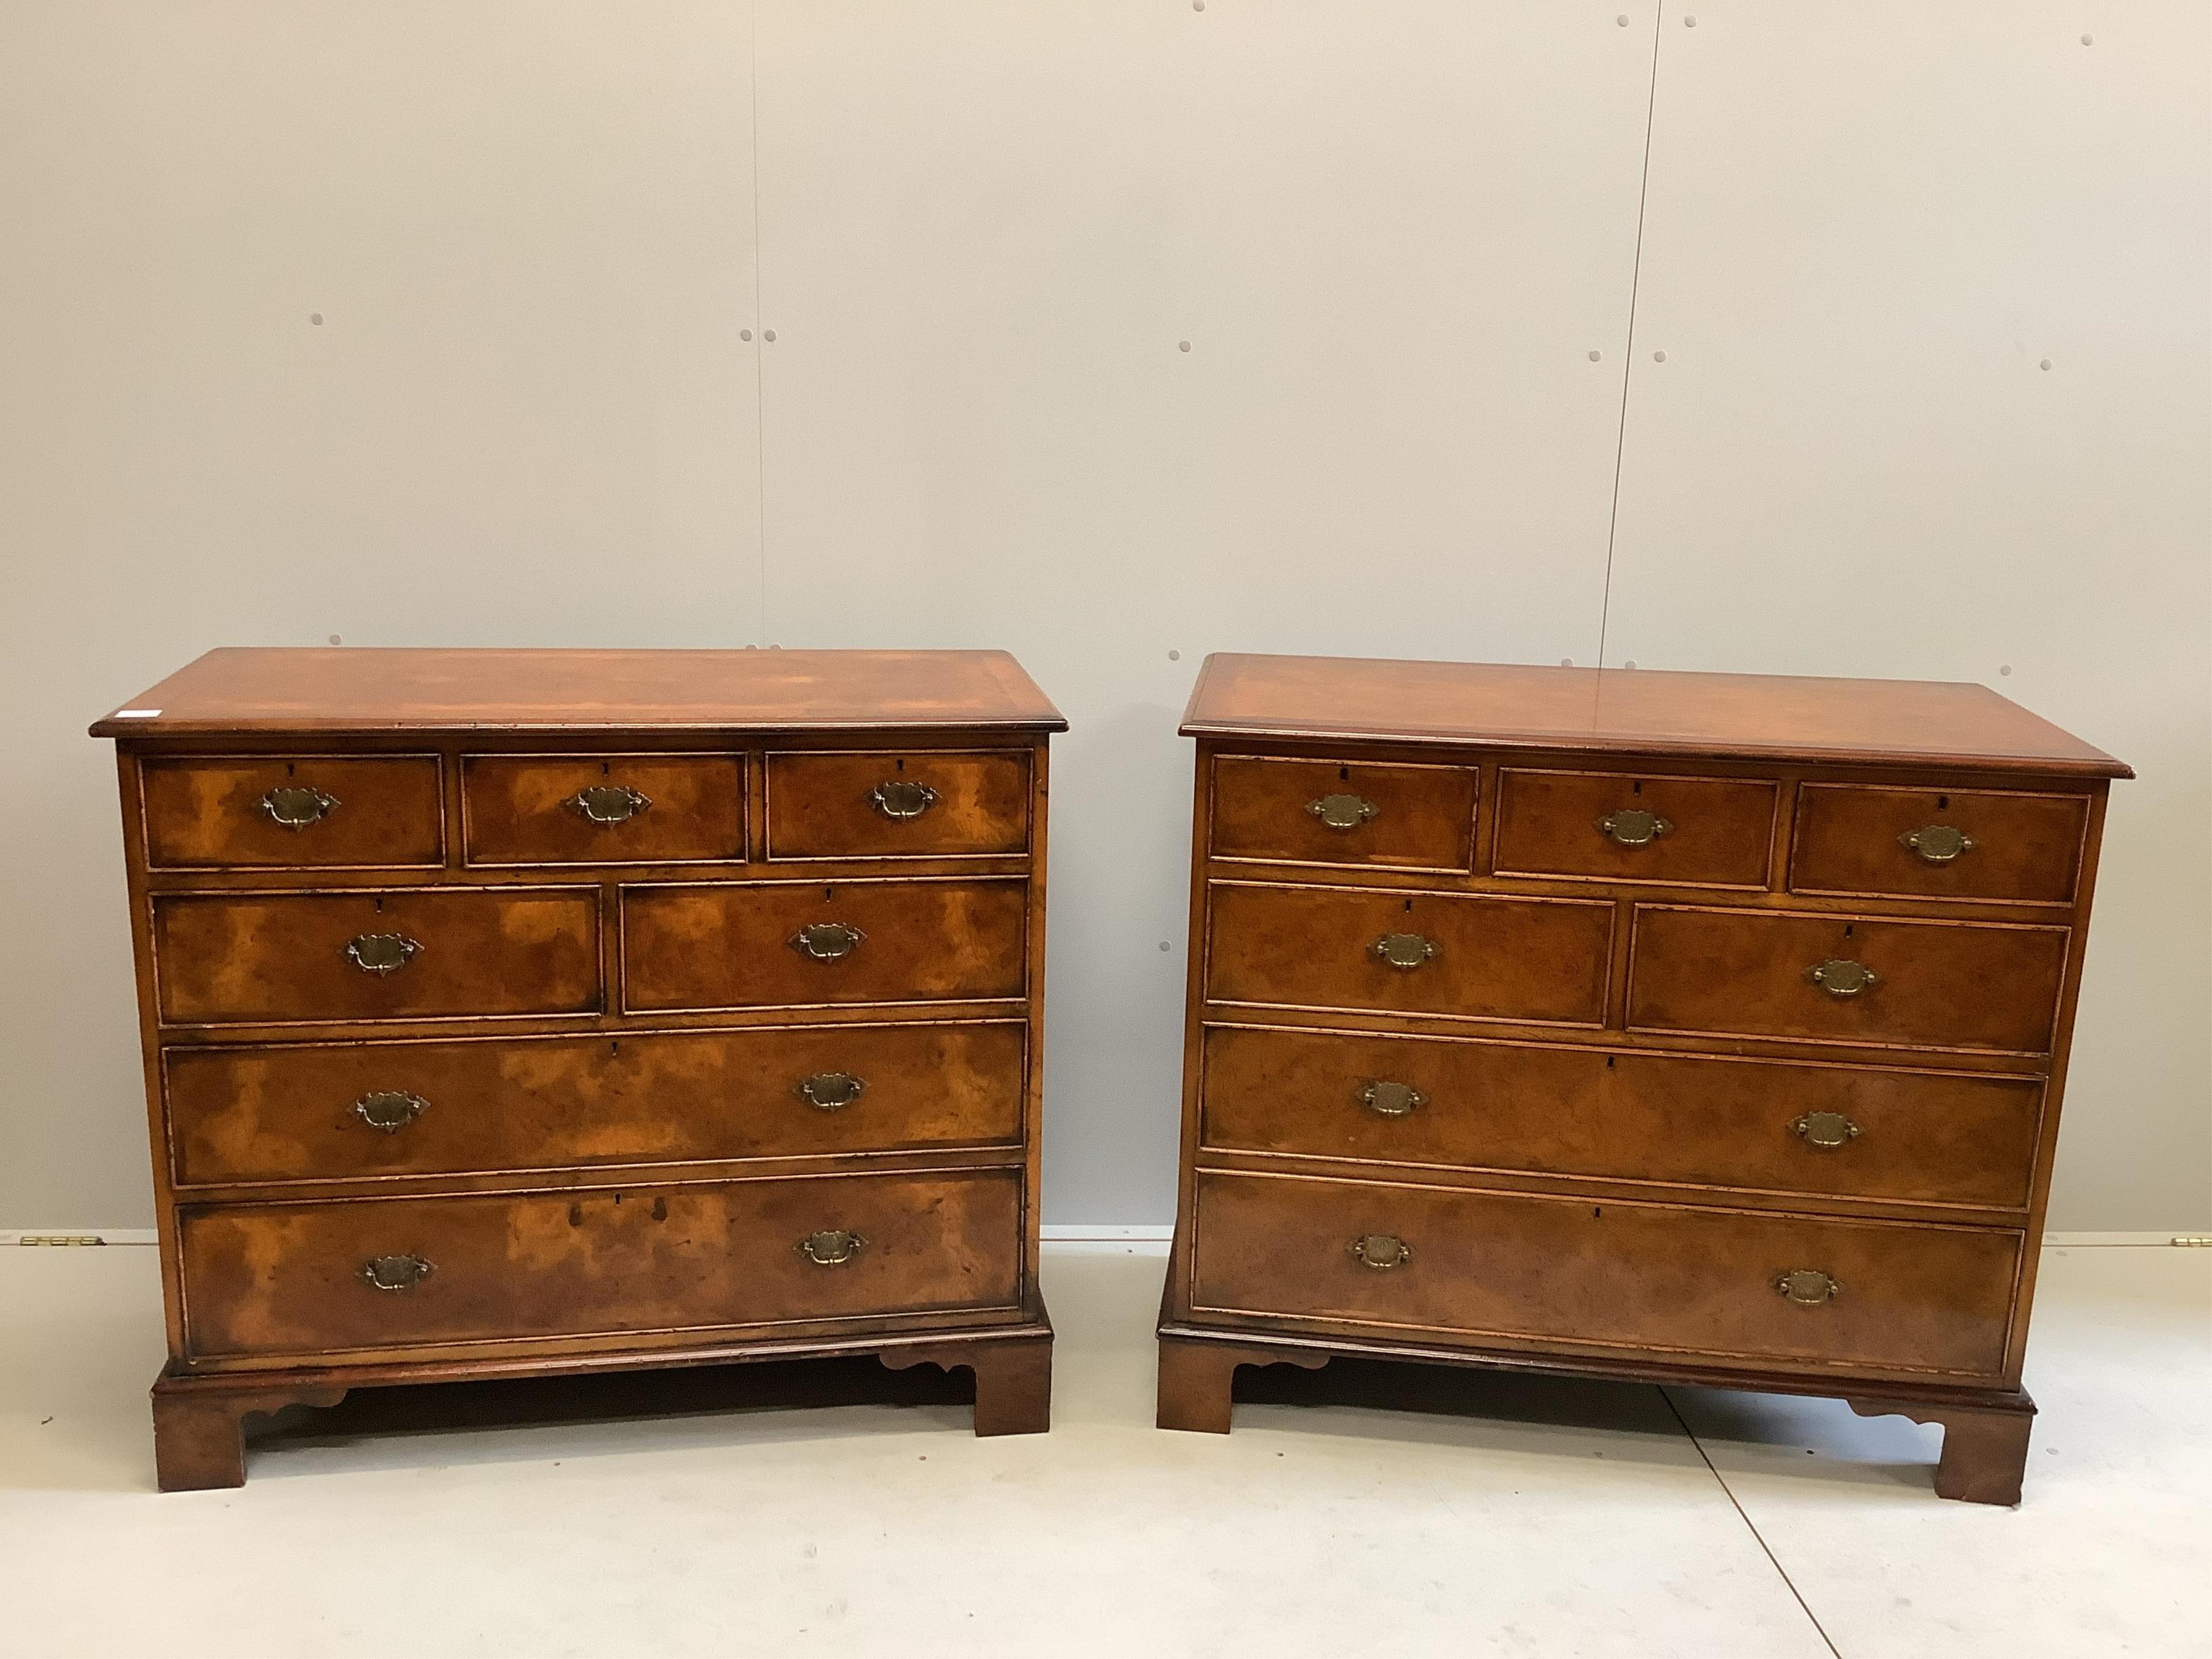 A pair of reproduction George I style feather banded walnut chests of drawers, width 104cm, depth 50cm, height 91cm